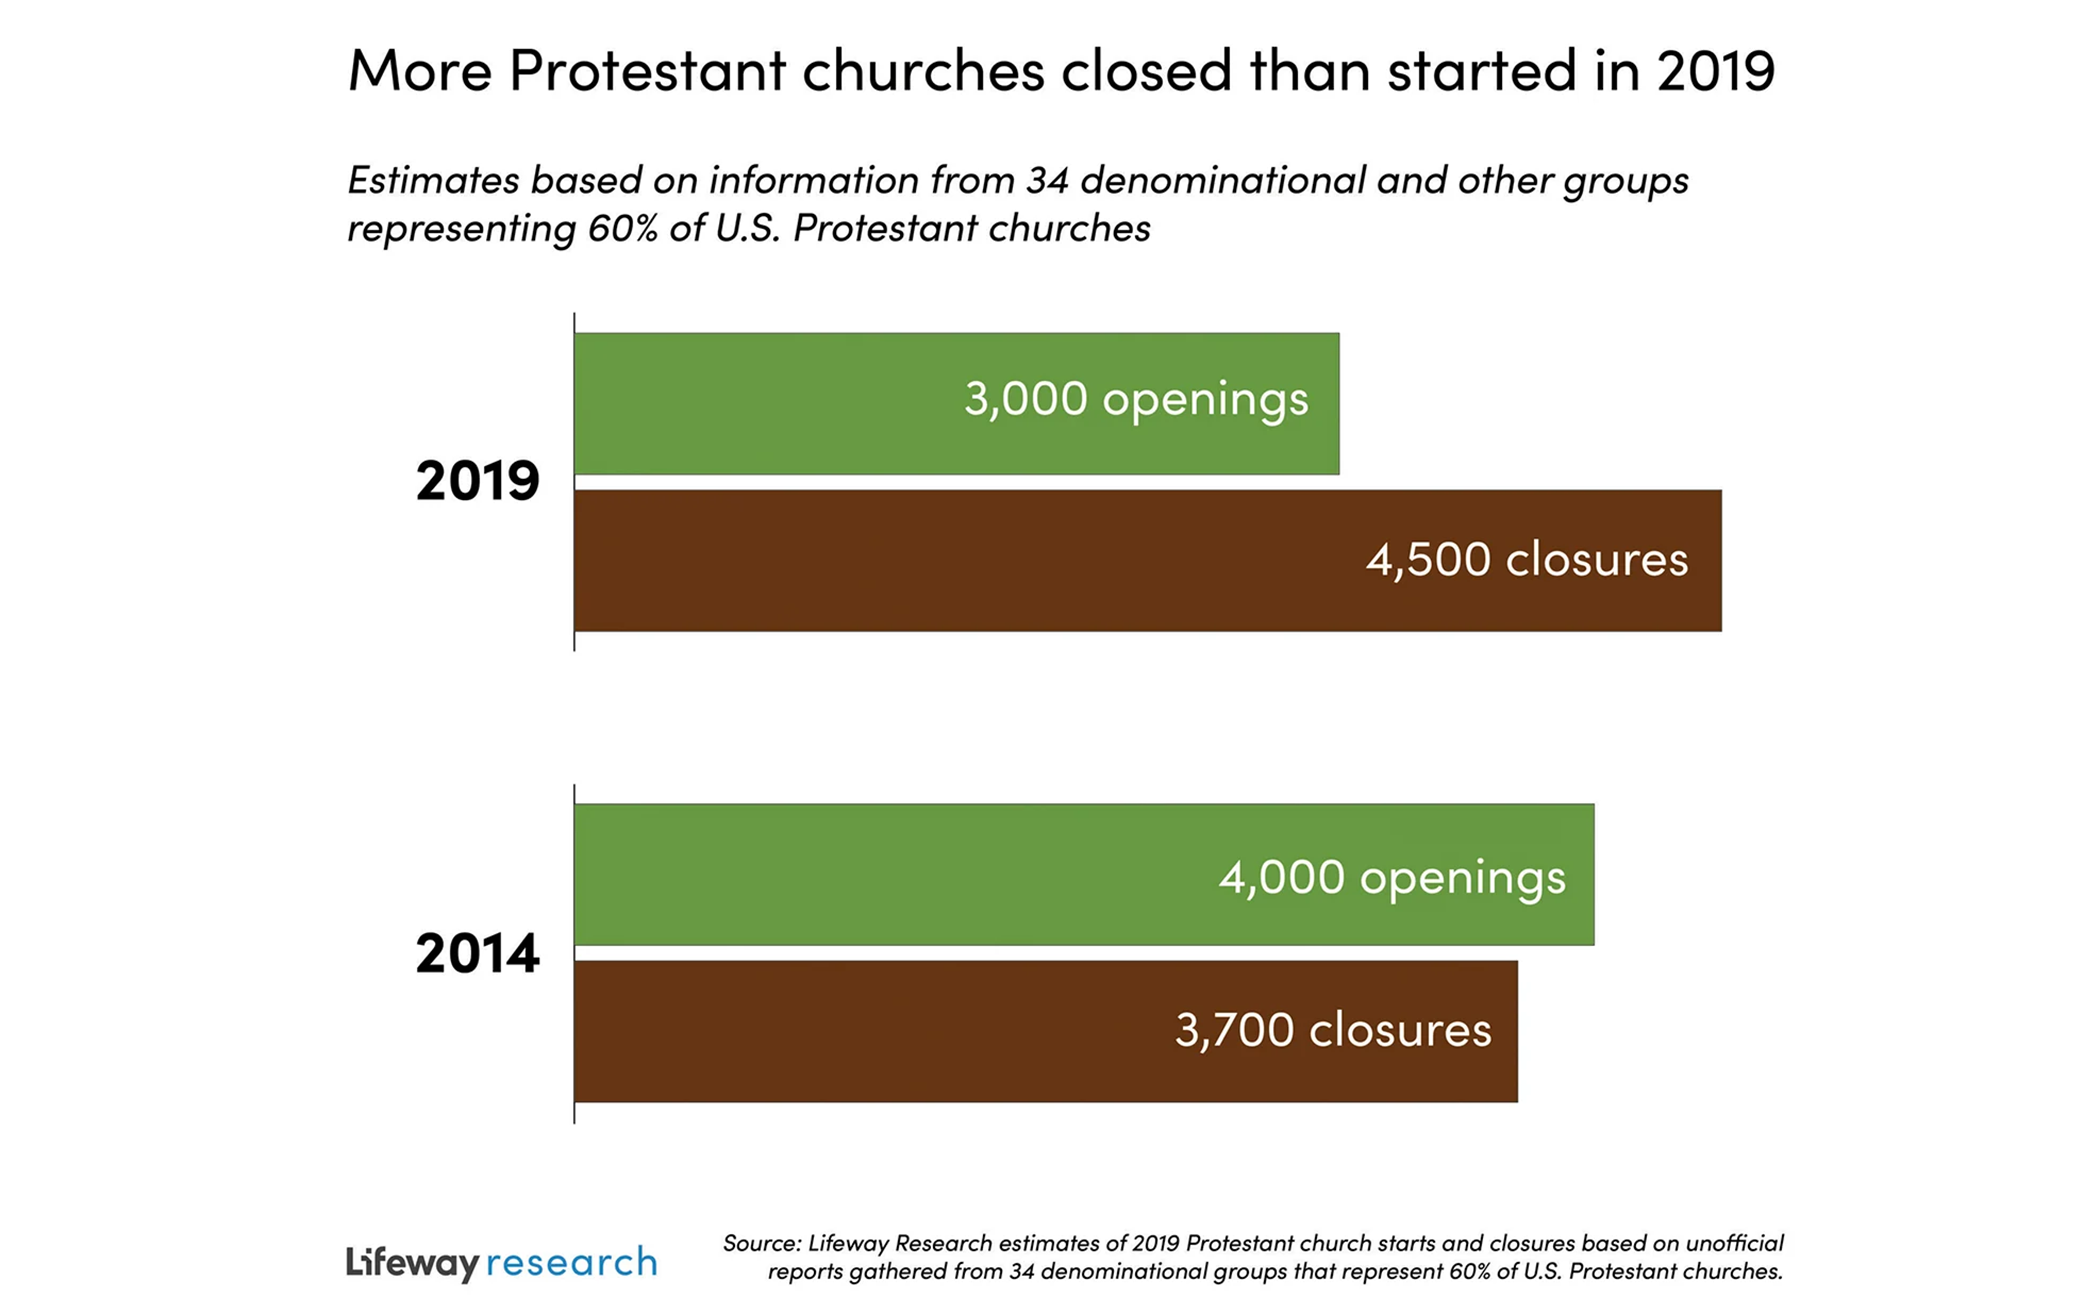 Study: More Churches Closing Than Opening in U.S.